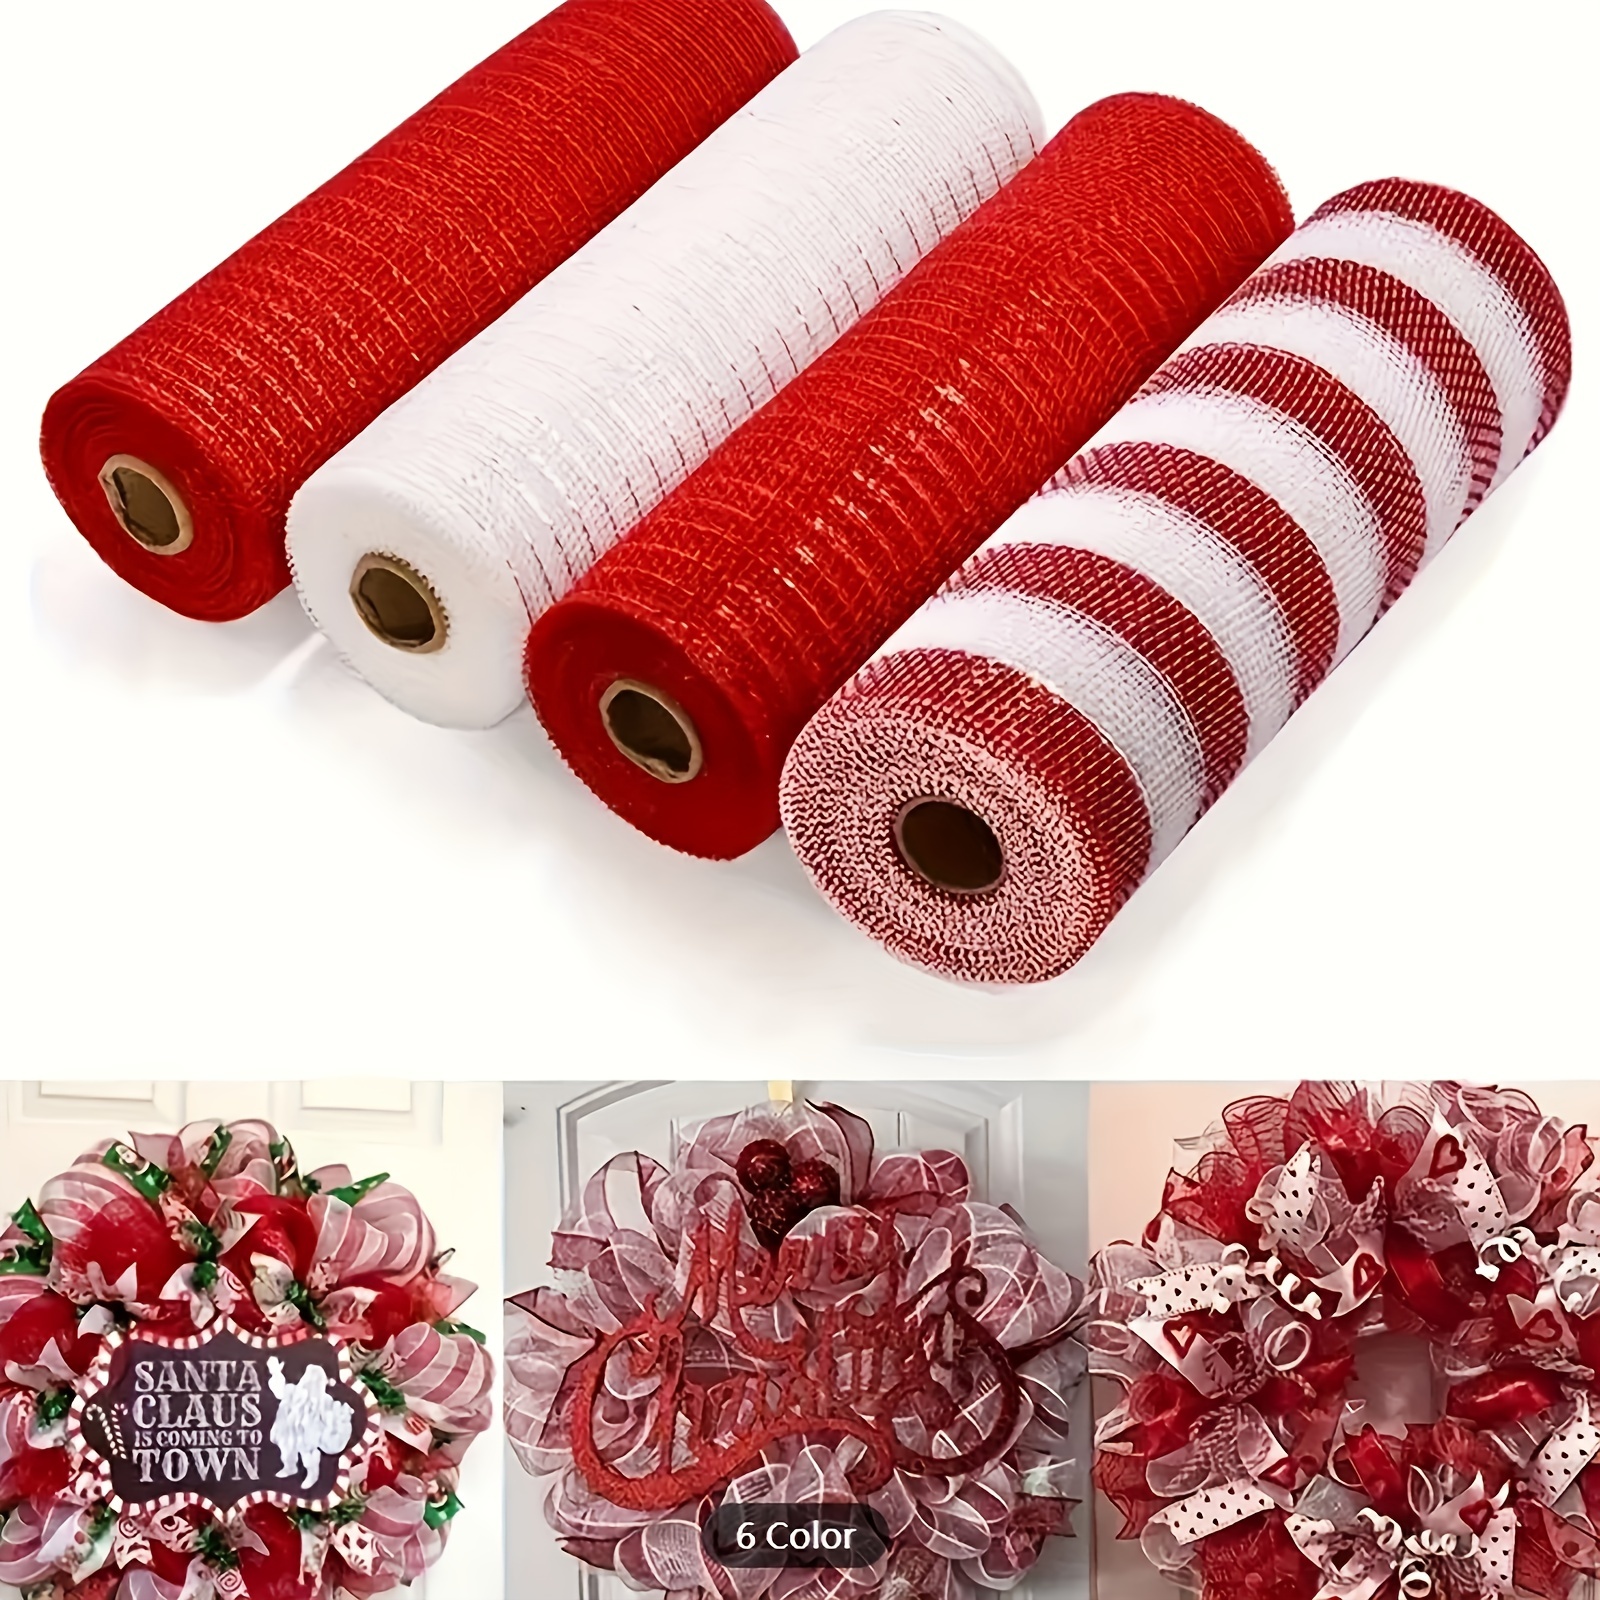 Red, White & Silver Striped Deco Mesh Craft Ribbon 21 x 20 Yards